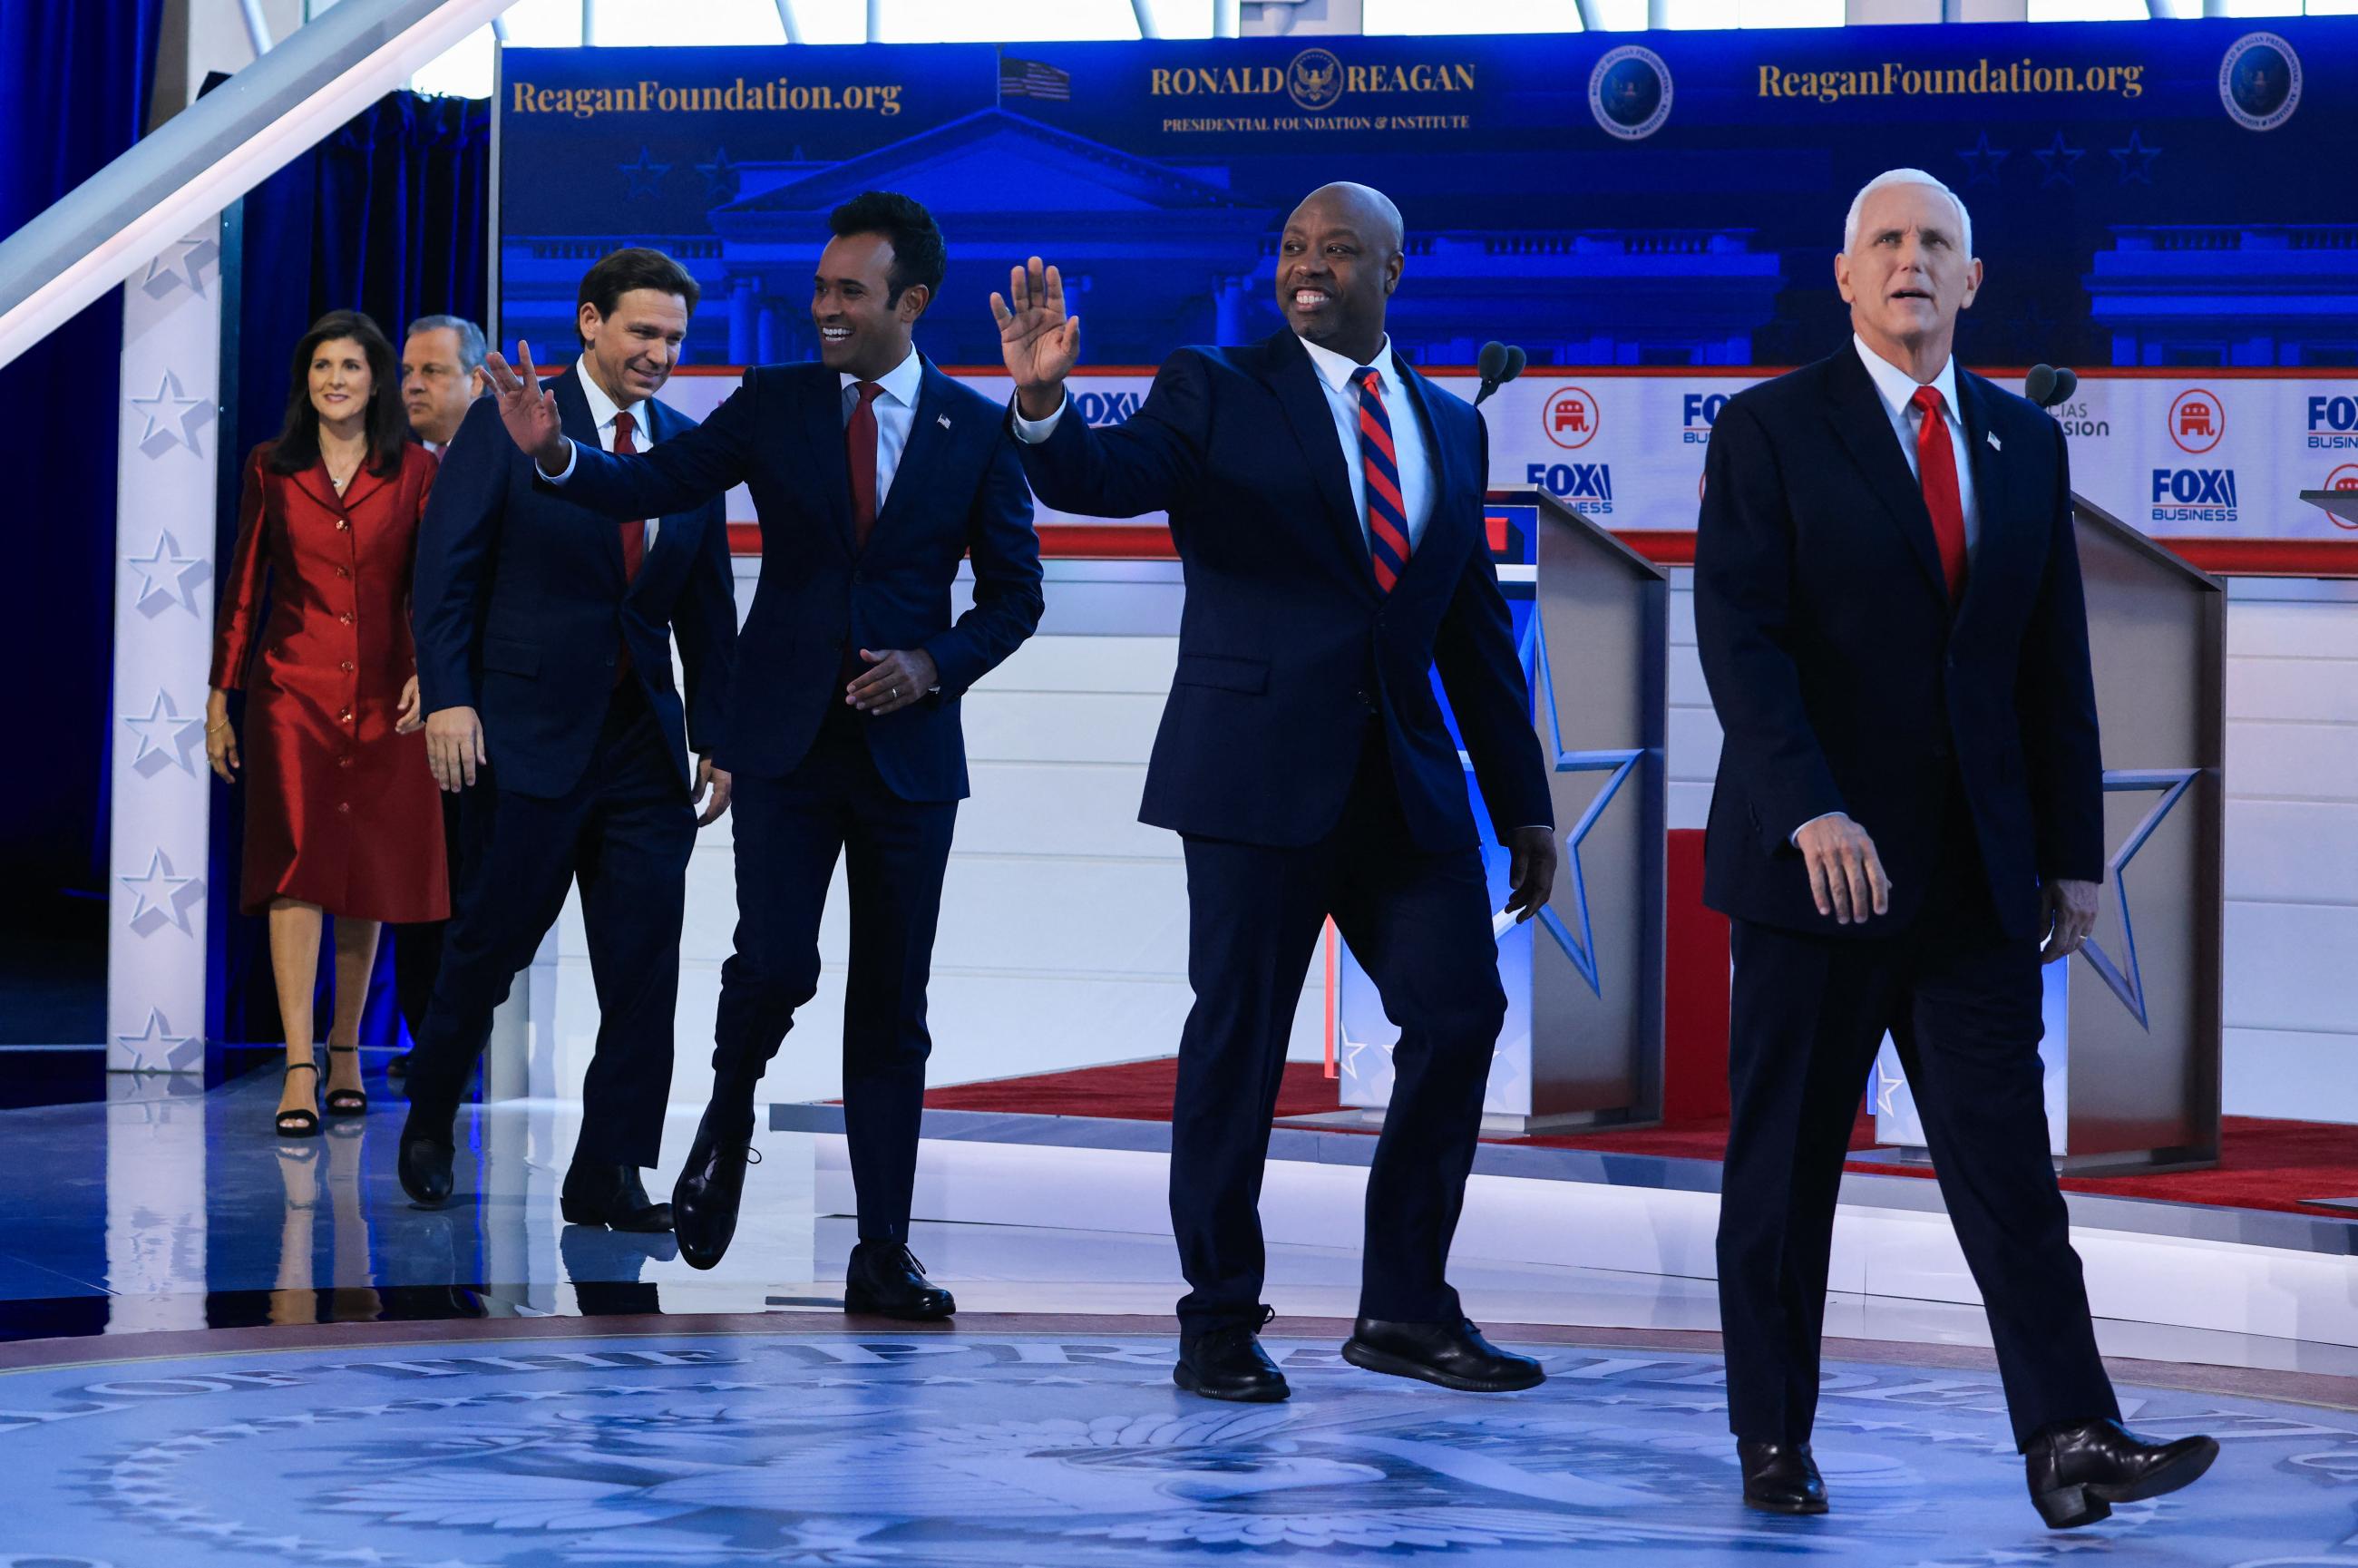 Former U.S. Vice President Mike Pence, U.S. Senator Tim Scott (R-SC), former biotech executive Vivek Ramaswamy, Florida Governor Ron DeSantis, former South Carolina Governor Nikki Haley and former New Jersey Governor Chris Christie arrive onstage for the second Republican candidates' debate of the 2024 U.S. presidential campaign at the Ronald Reagan Presidential Library in Simi Valley, California, U.S. September 27, 2023.